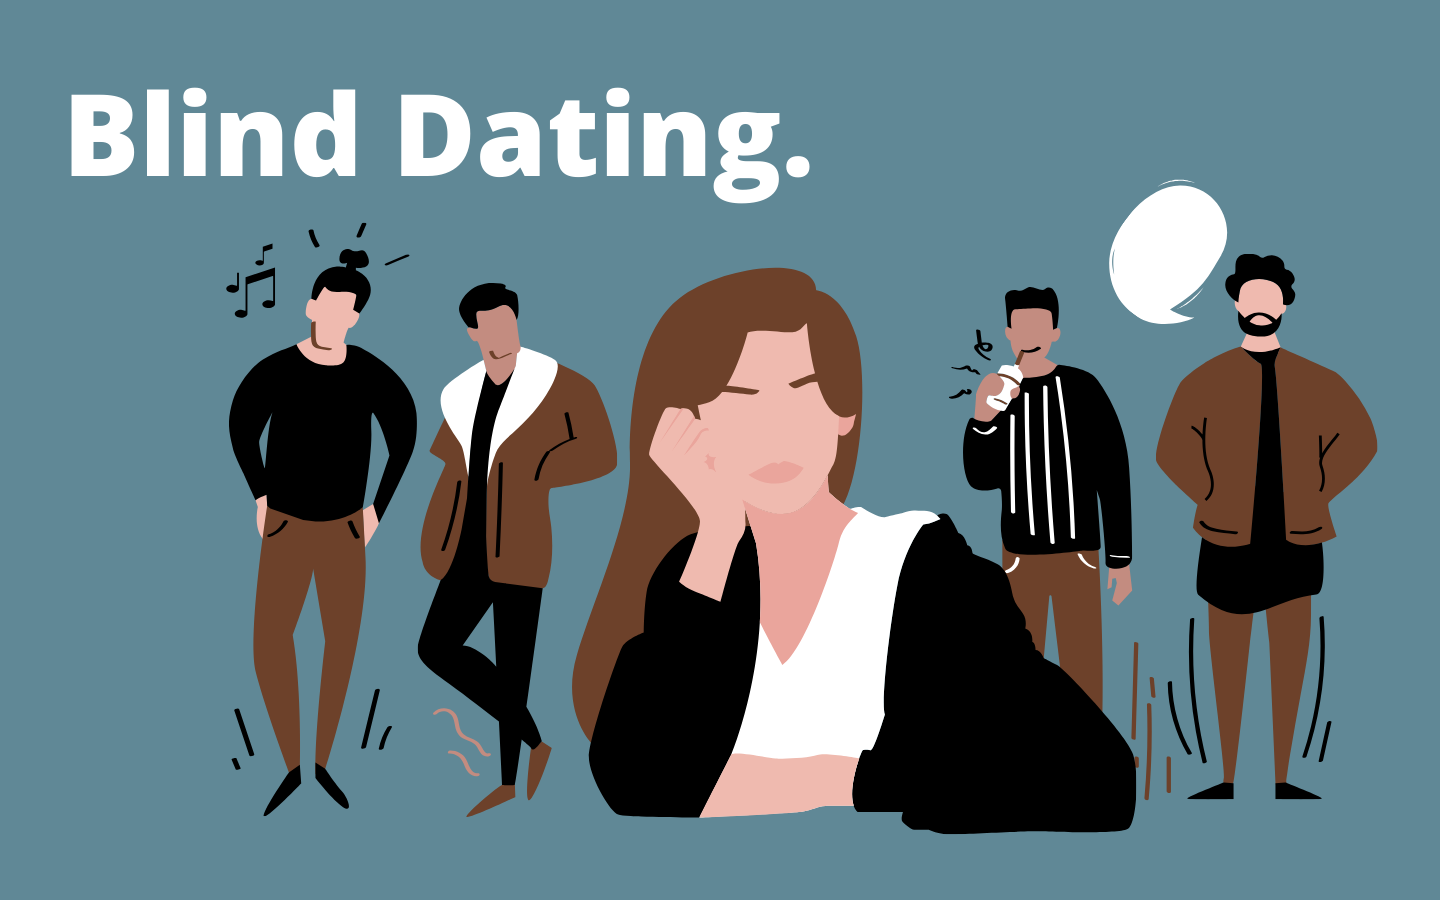 Text:  Blind Dating  Graphic:  silhouettes of people, woman in center thinking